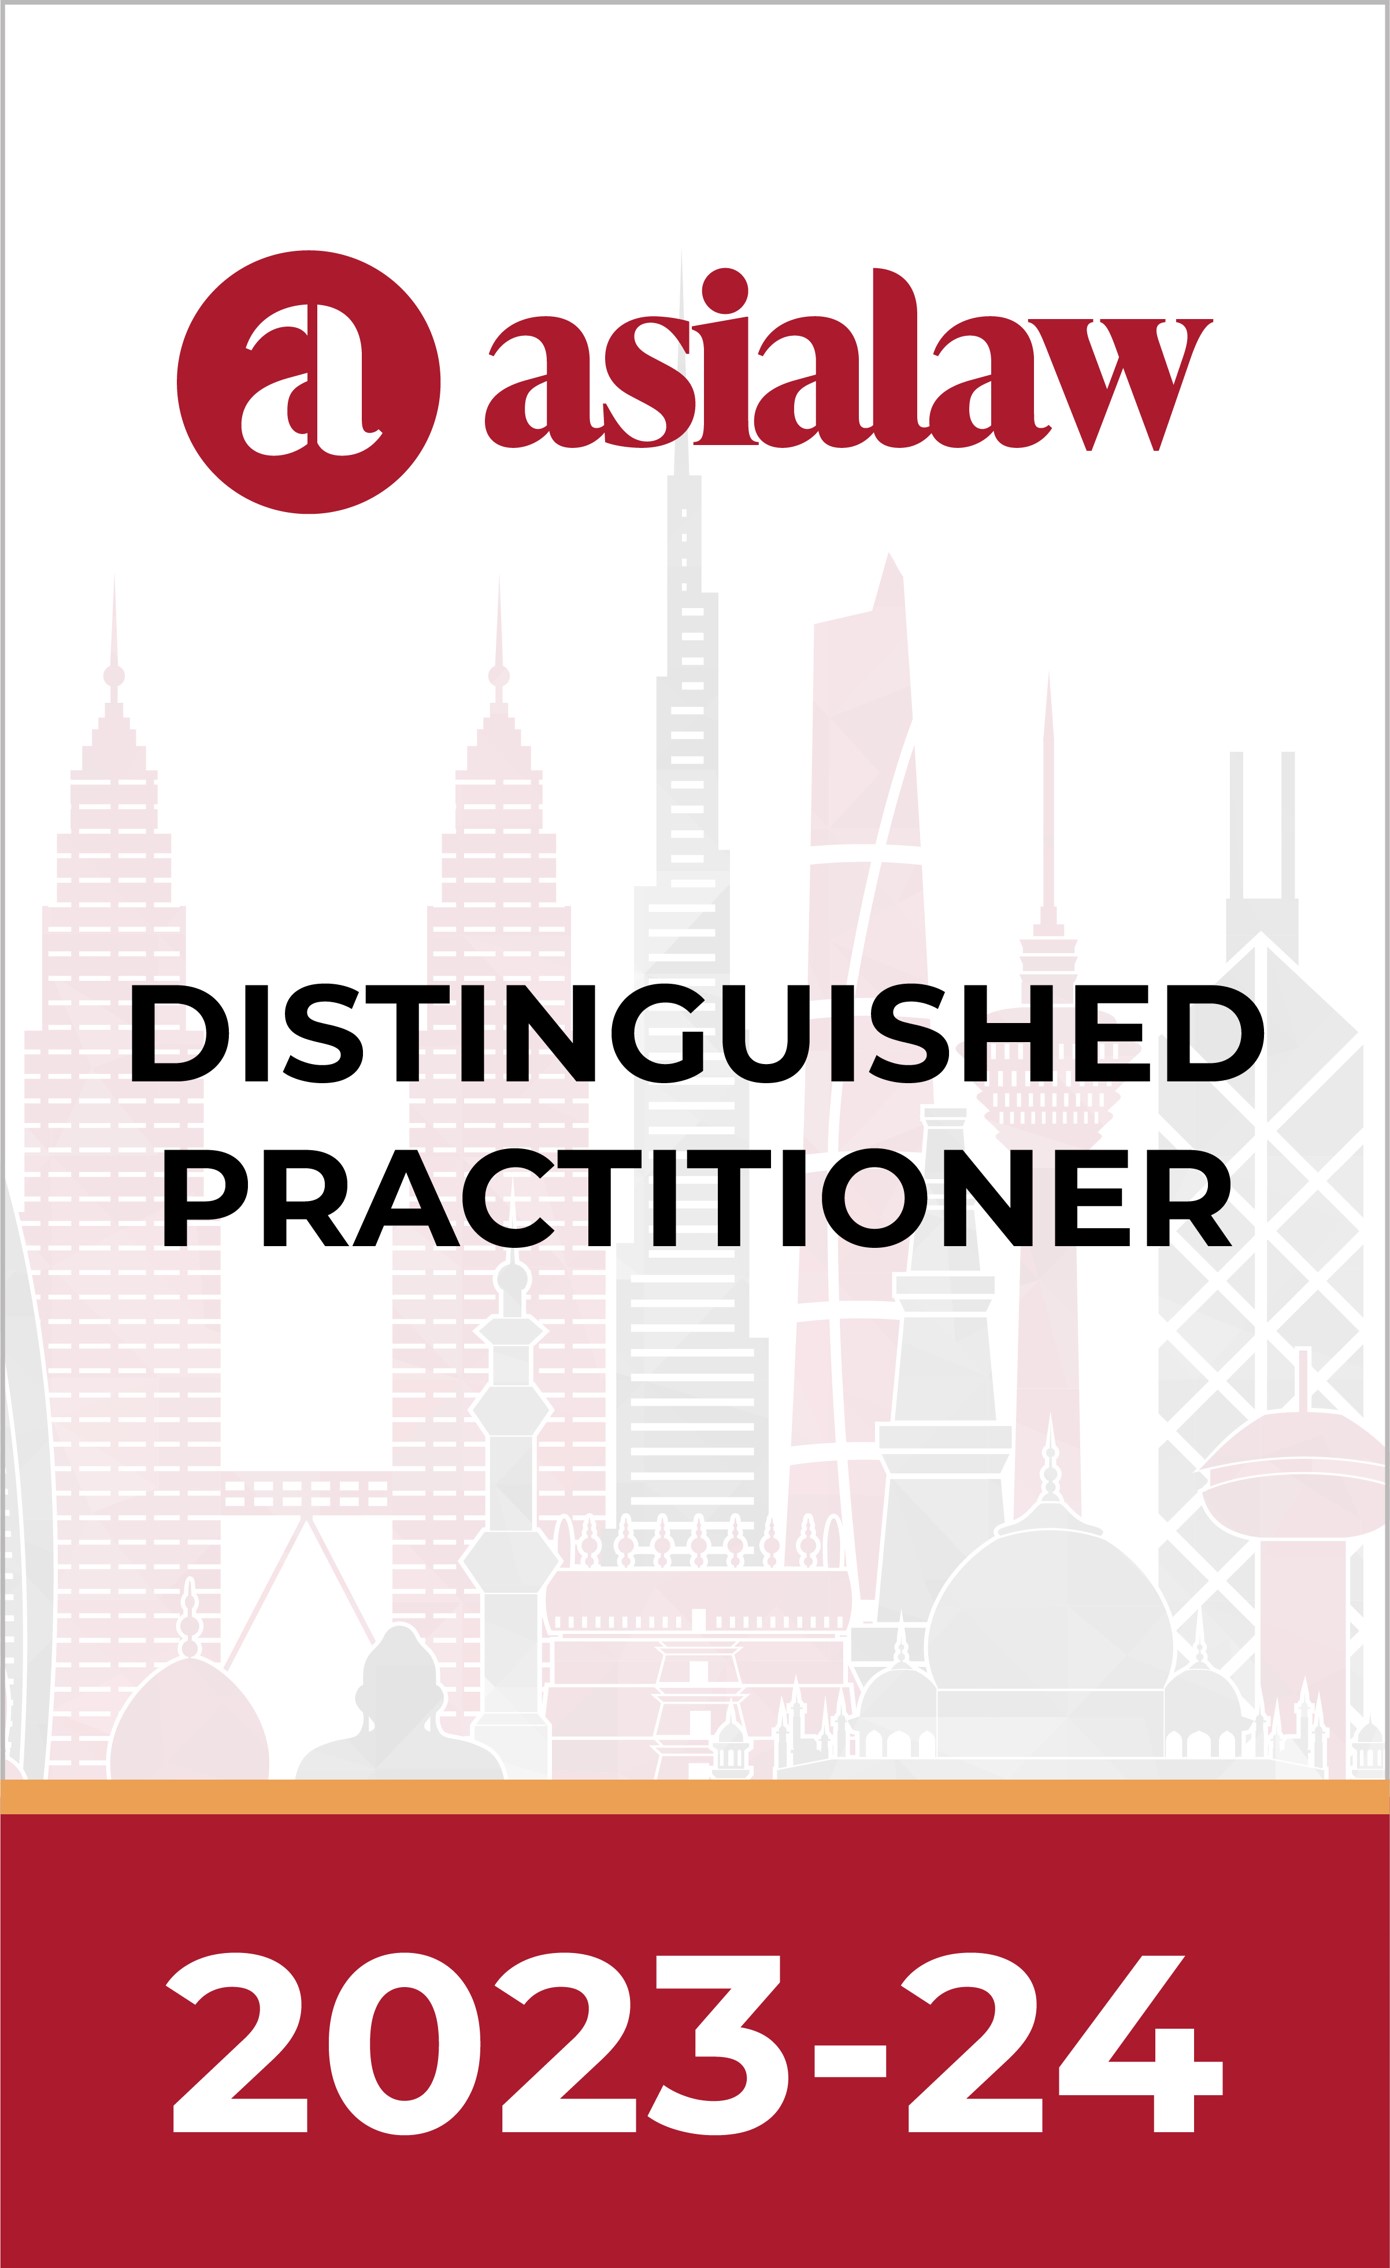 asialaw Distinguished Practitioner in Capital markets: Hong Kong, 2023/24